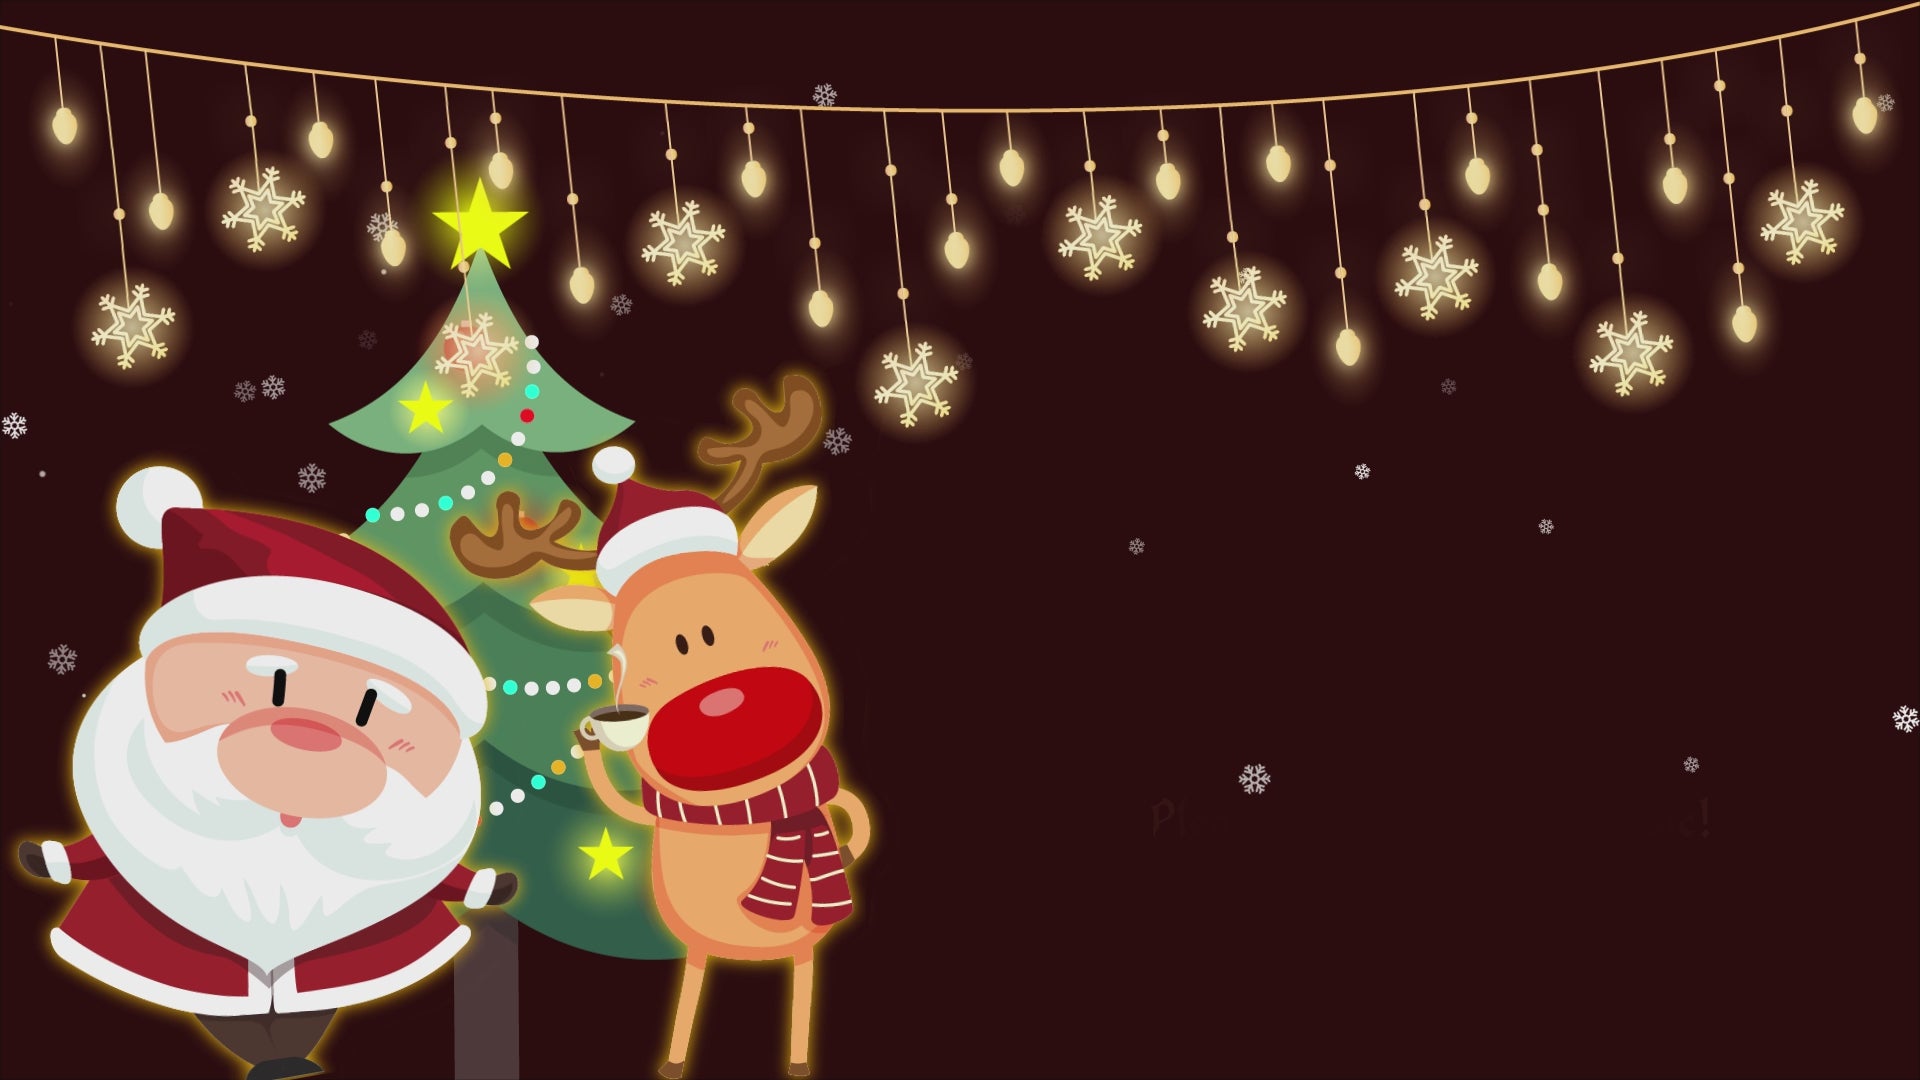 Animated Scenes Cute Dancing Santa Clause and Rudolph